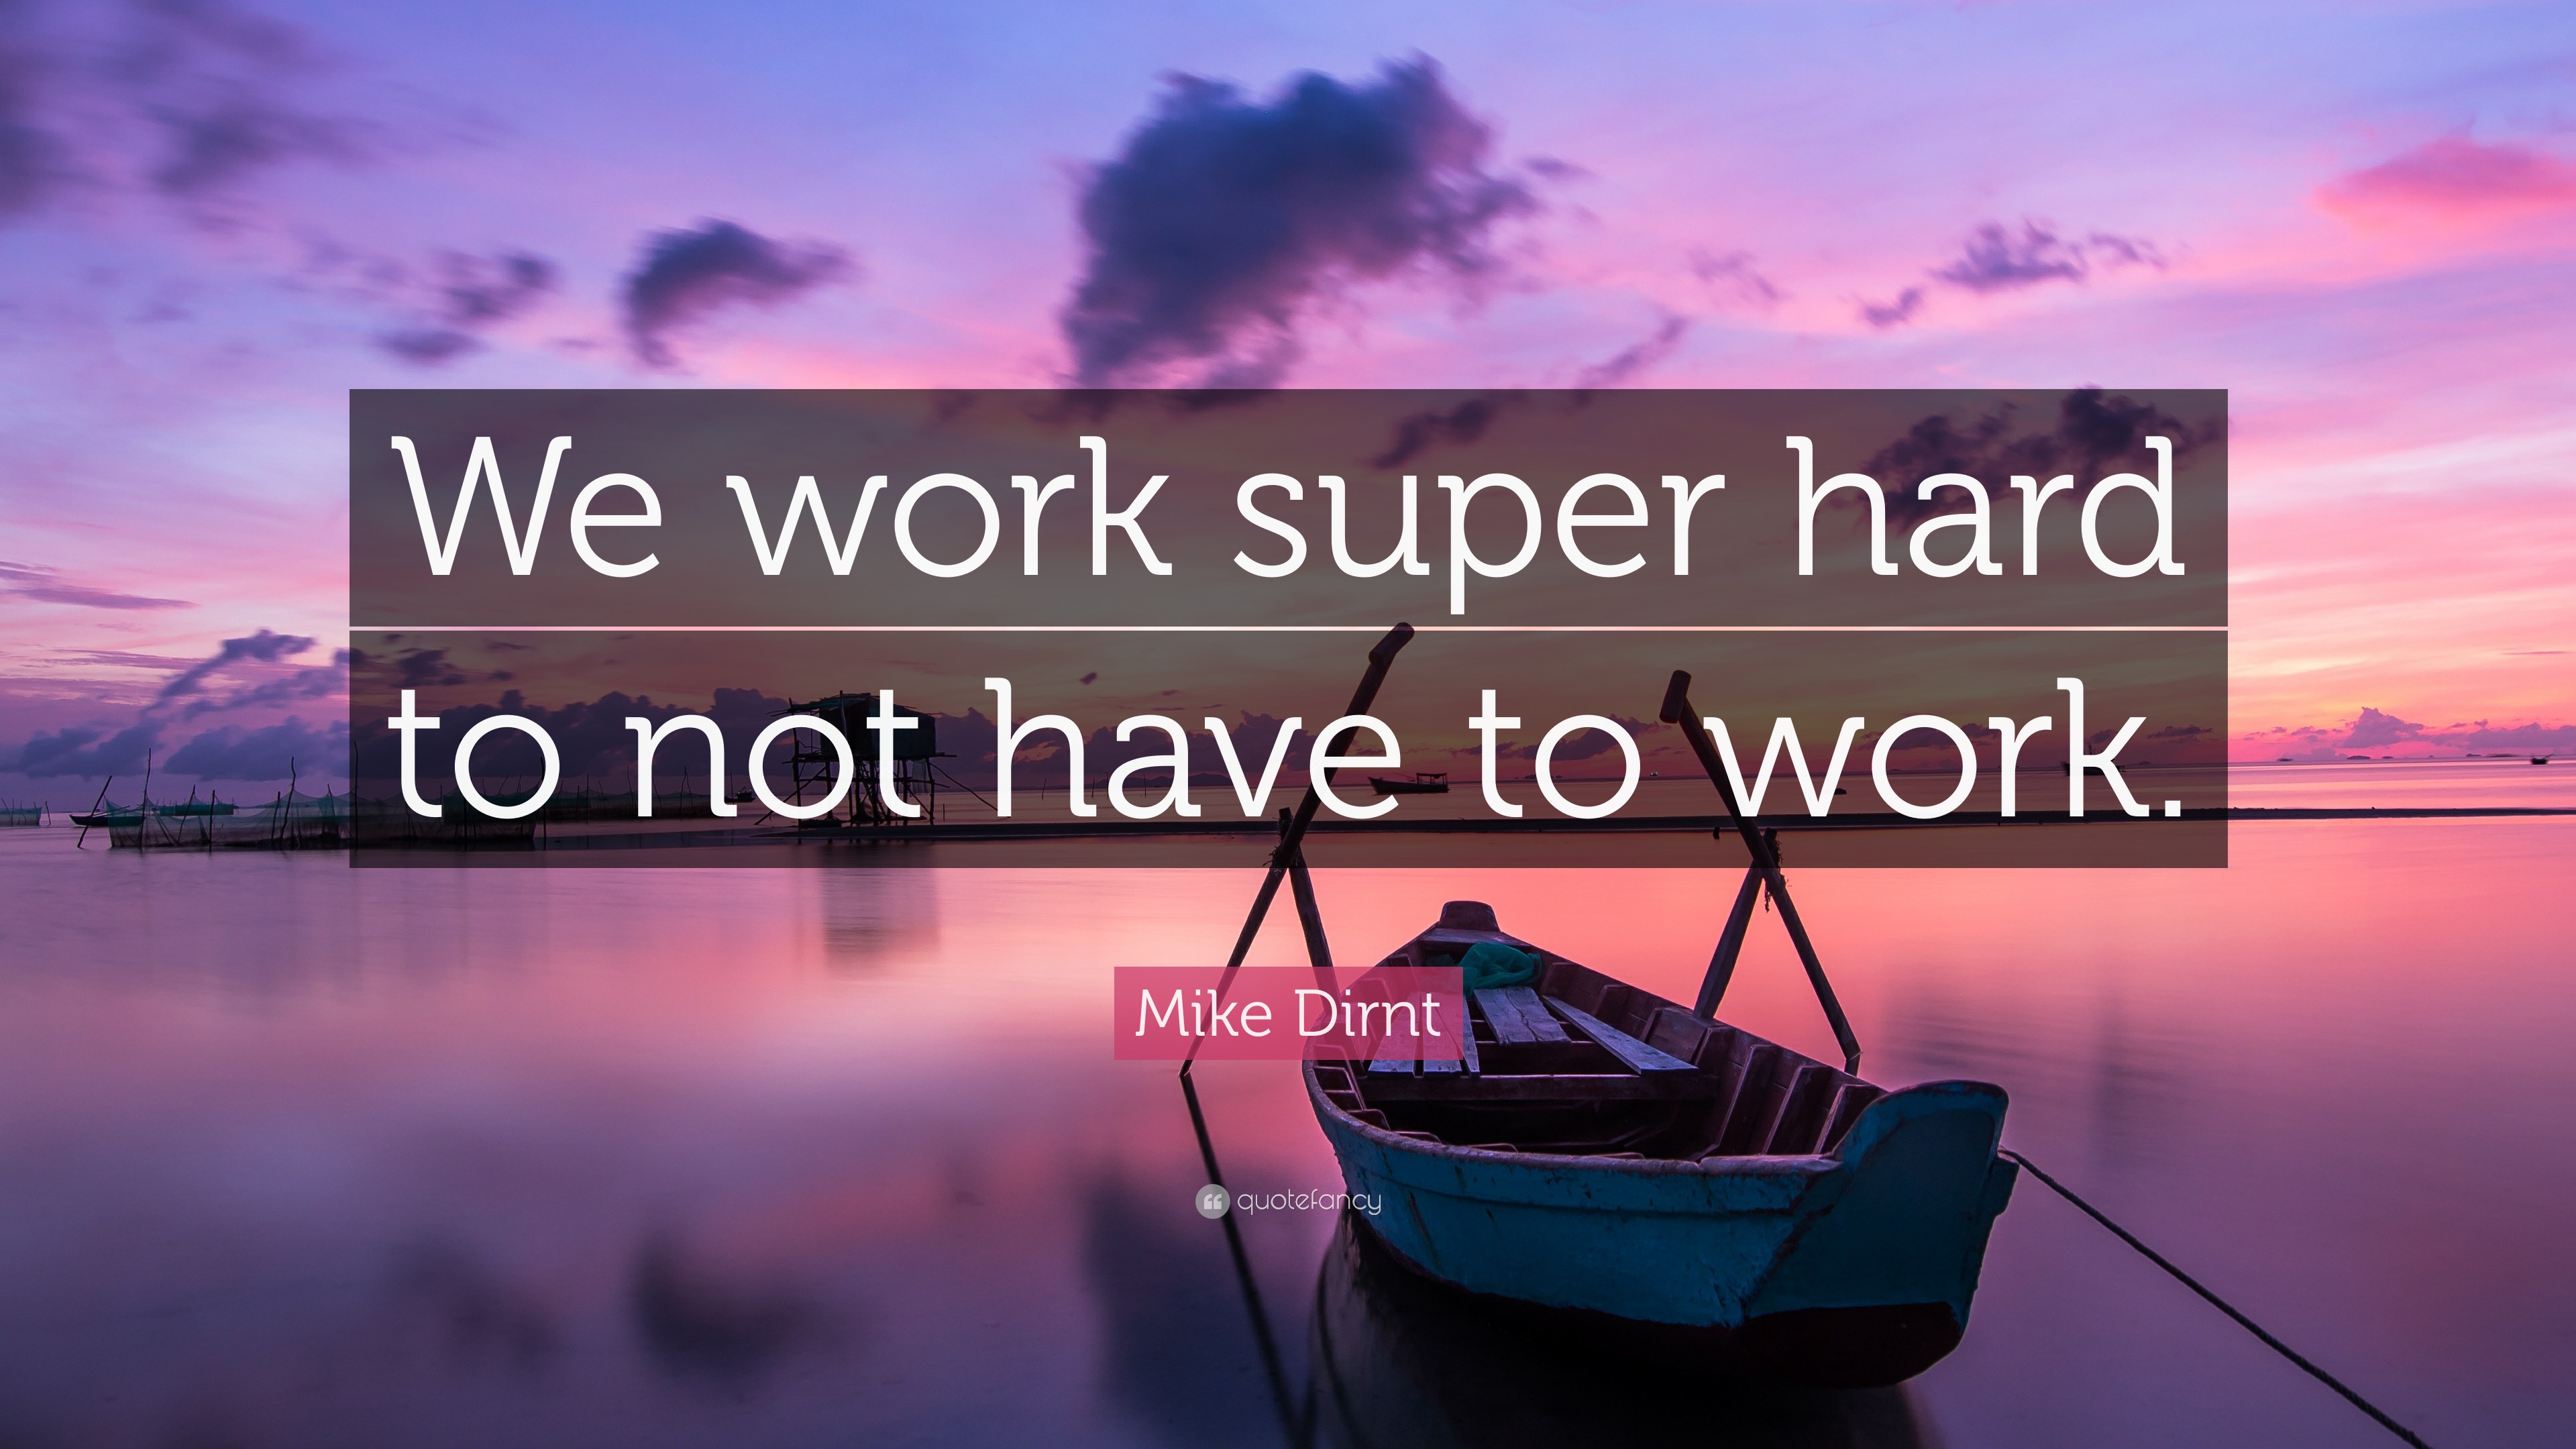 Mike Dirnt Quote: “We work super hard to not have to work.”